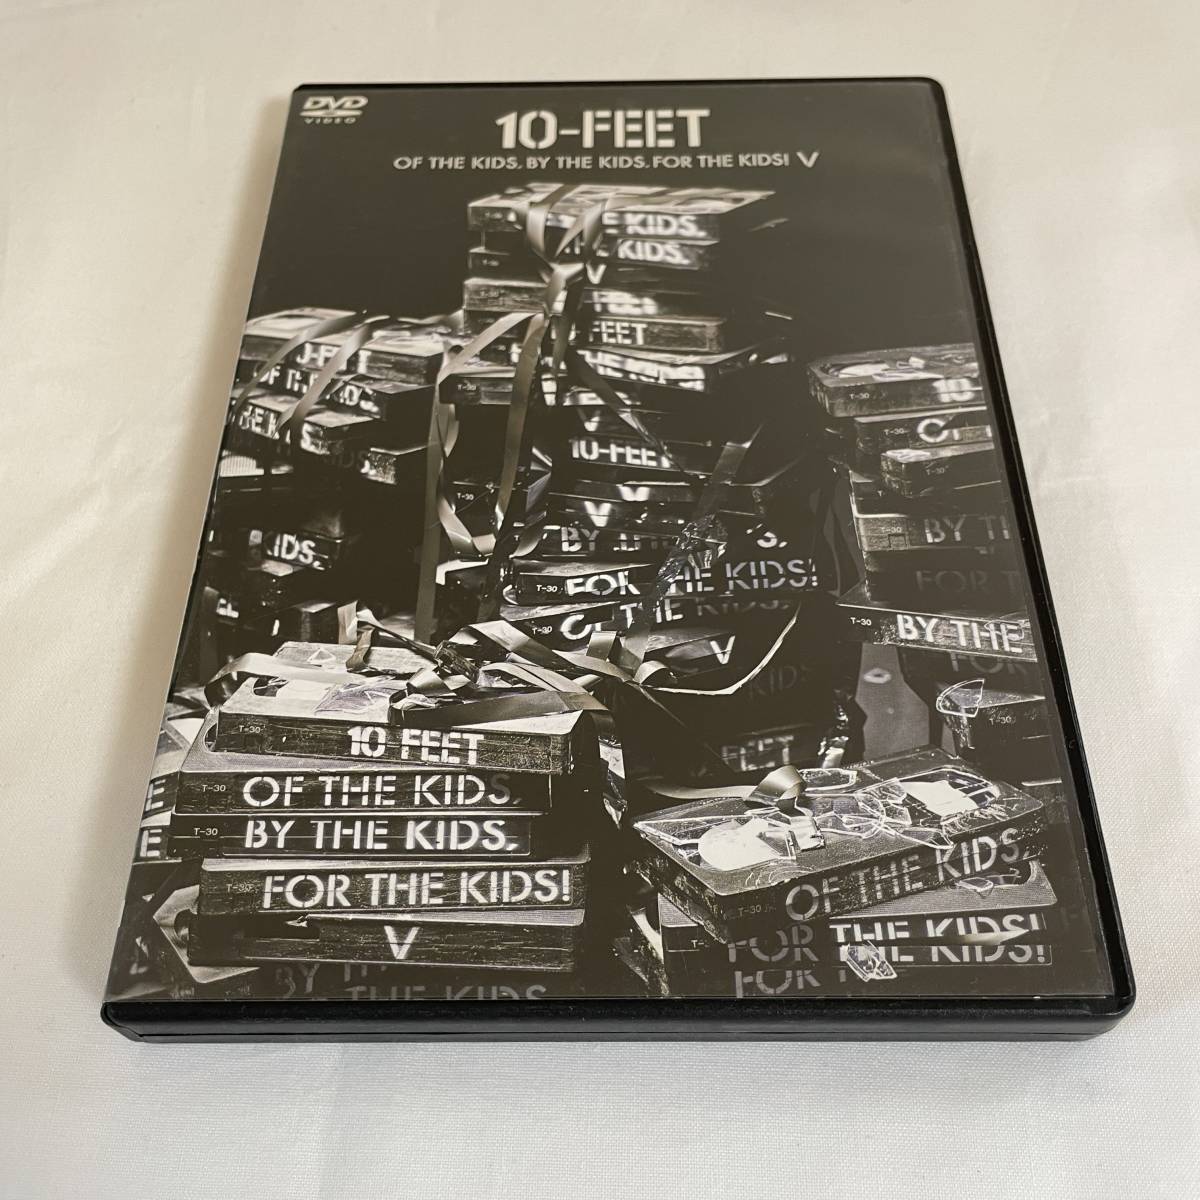 DVD　10FEET / OF THE KIDS, BY THE KIDS, FOR THE KIDS! V　　　　　管0817b10_画像1